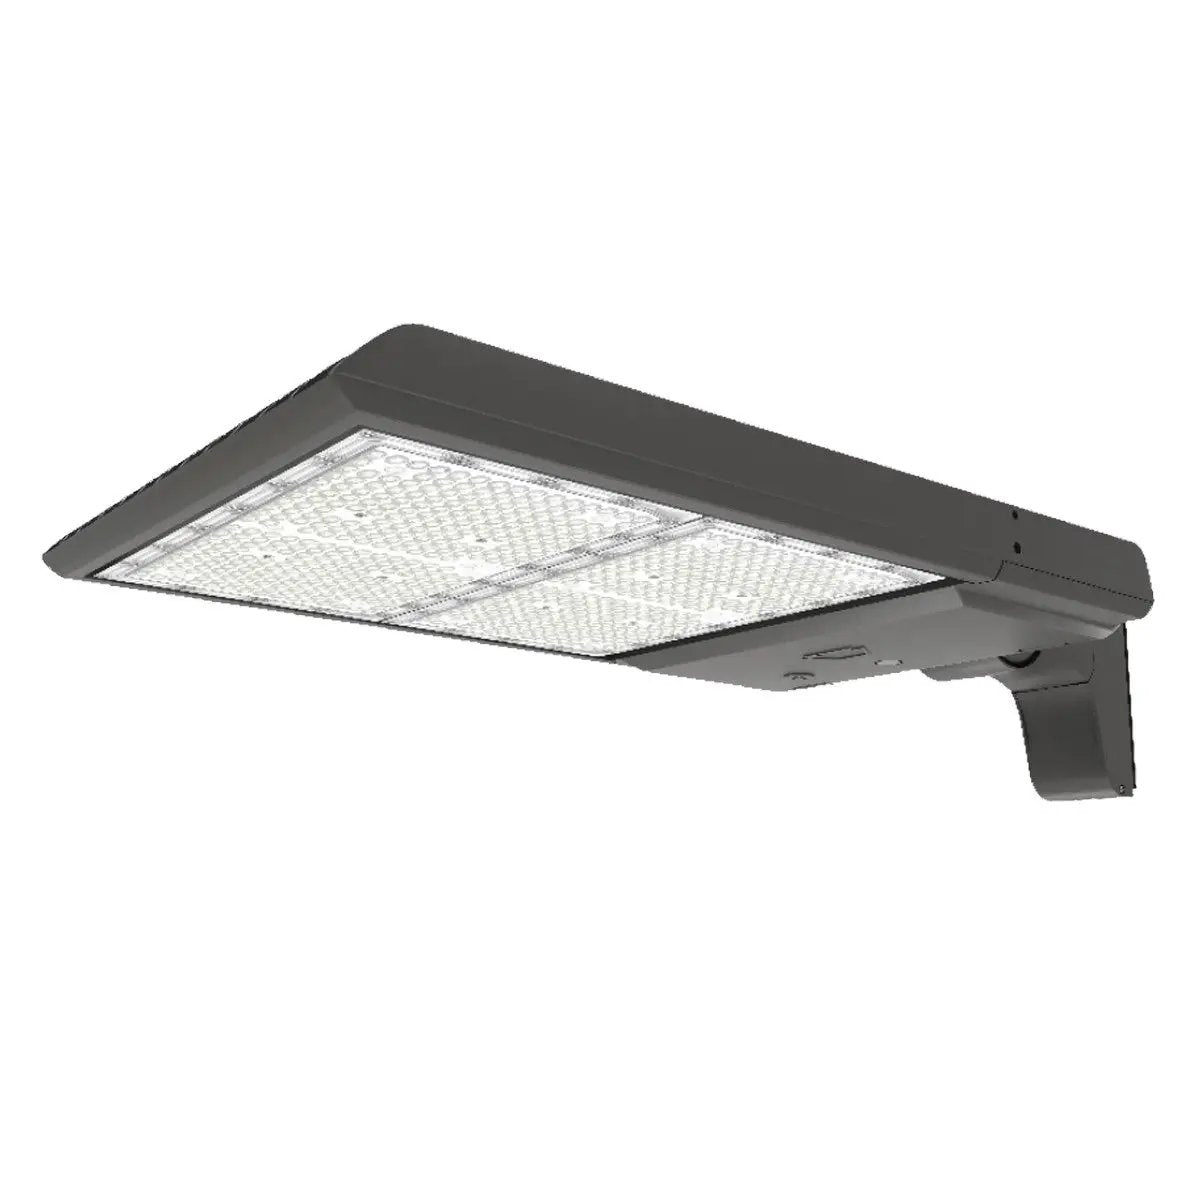 Area Light LED Fixture with adjustable wattage and color temperature. Provides 27380 to 41180 lumens of energy-saving light output. Dimmable and suitable for wet locations. 5-year warranty.